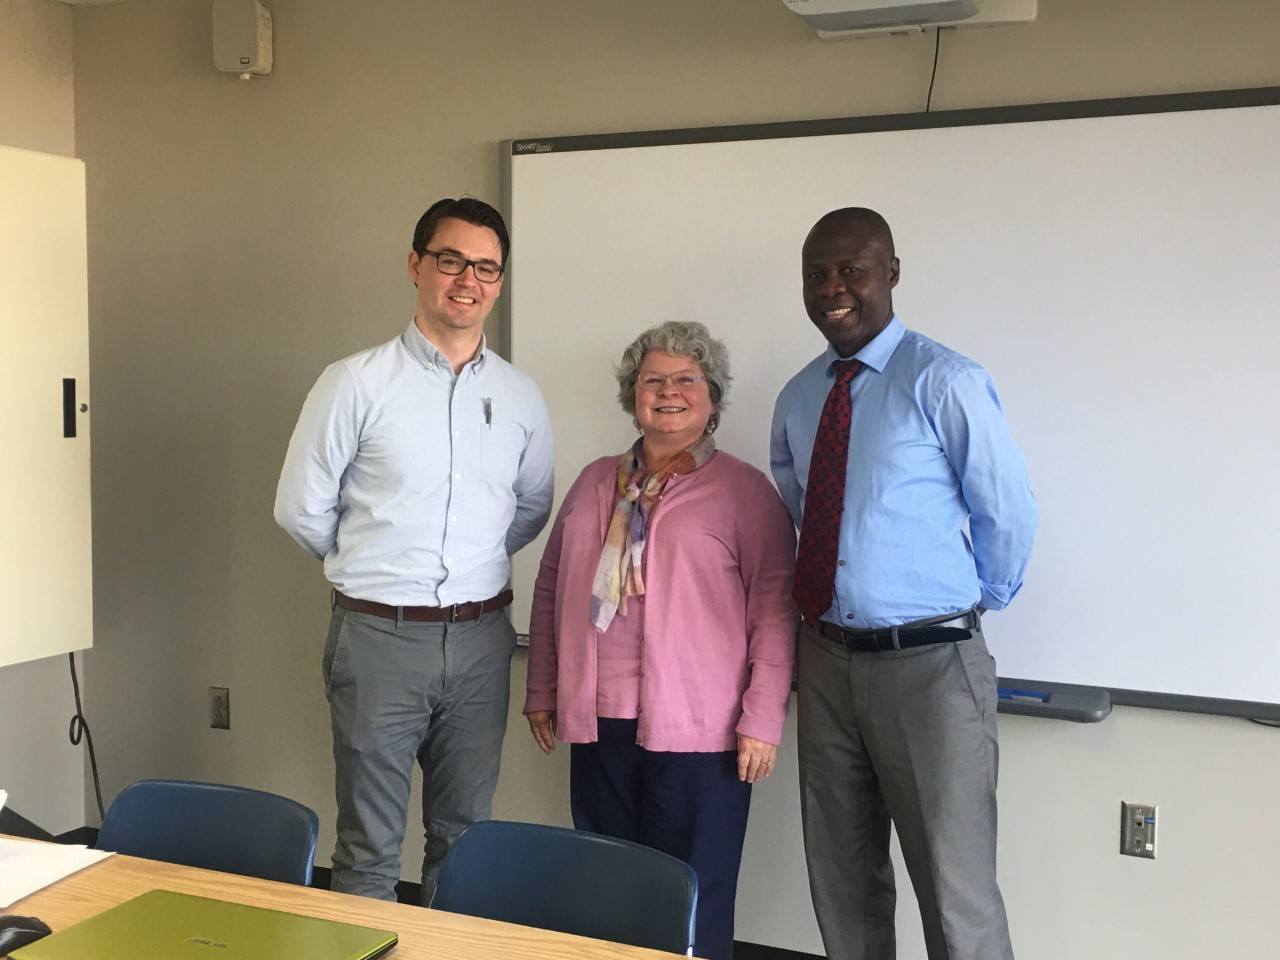 A picture of co-chairs Dr. Dan Bommarito and Dr. Sue Carter Wood with Stephen Ohene-Larbi